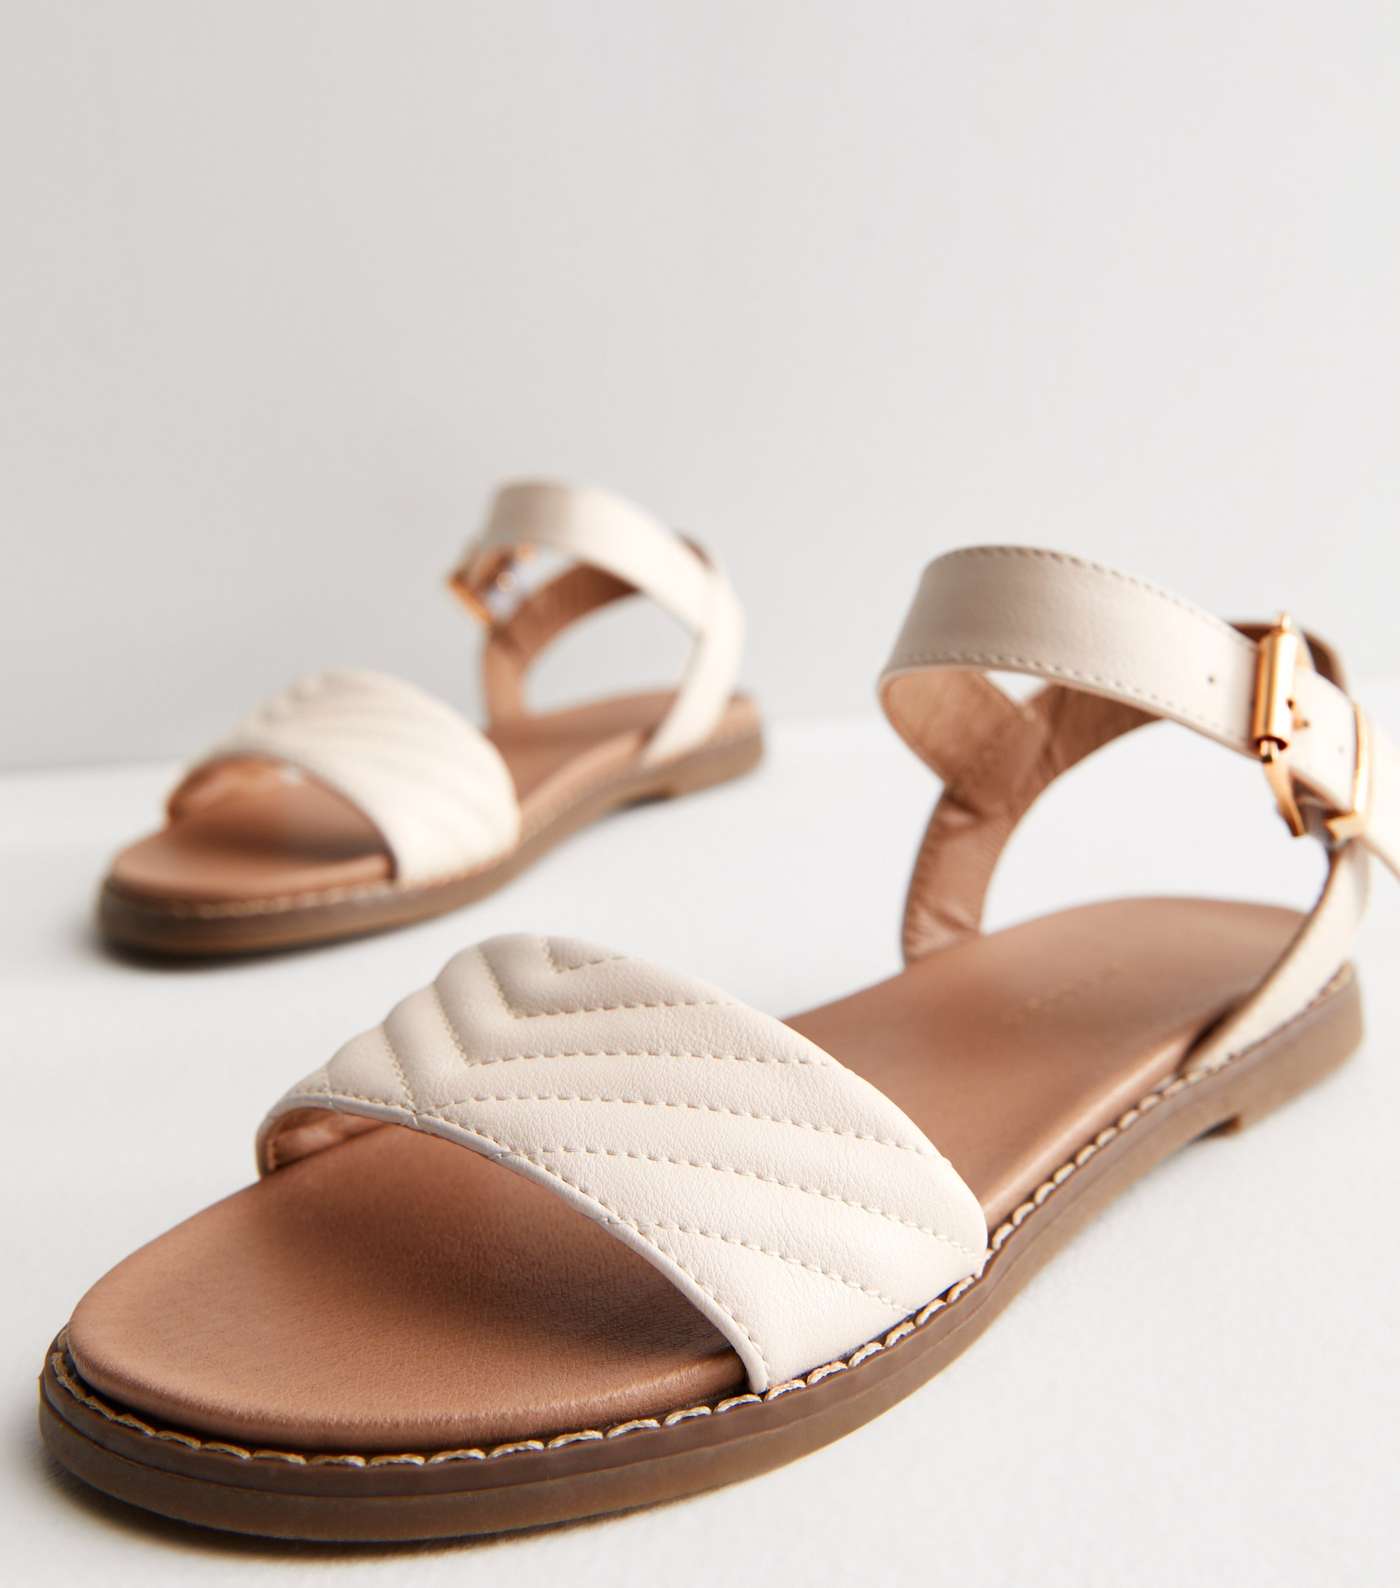 Off White Quilted 2 Part Buckle Sandals Image 3